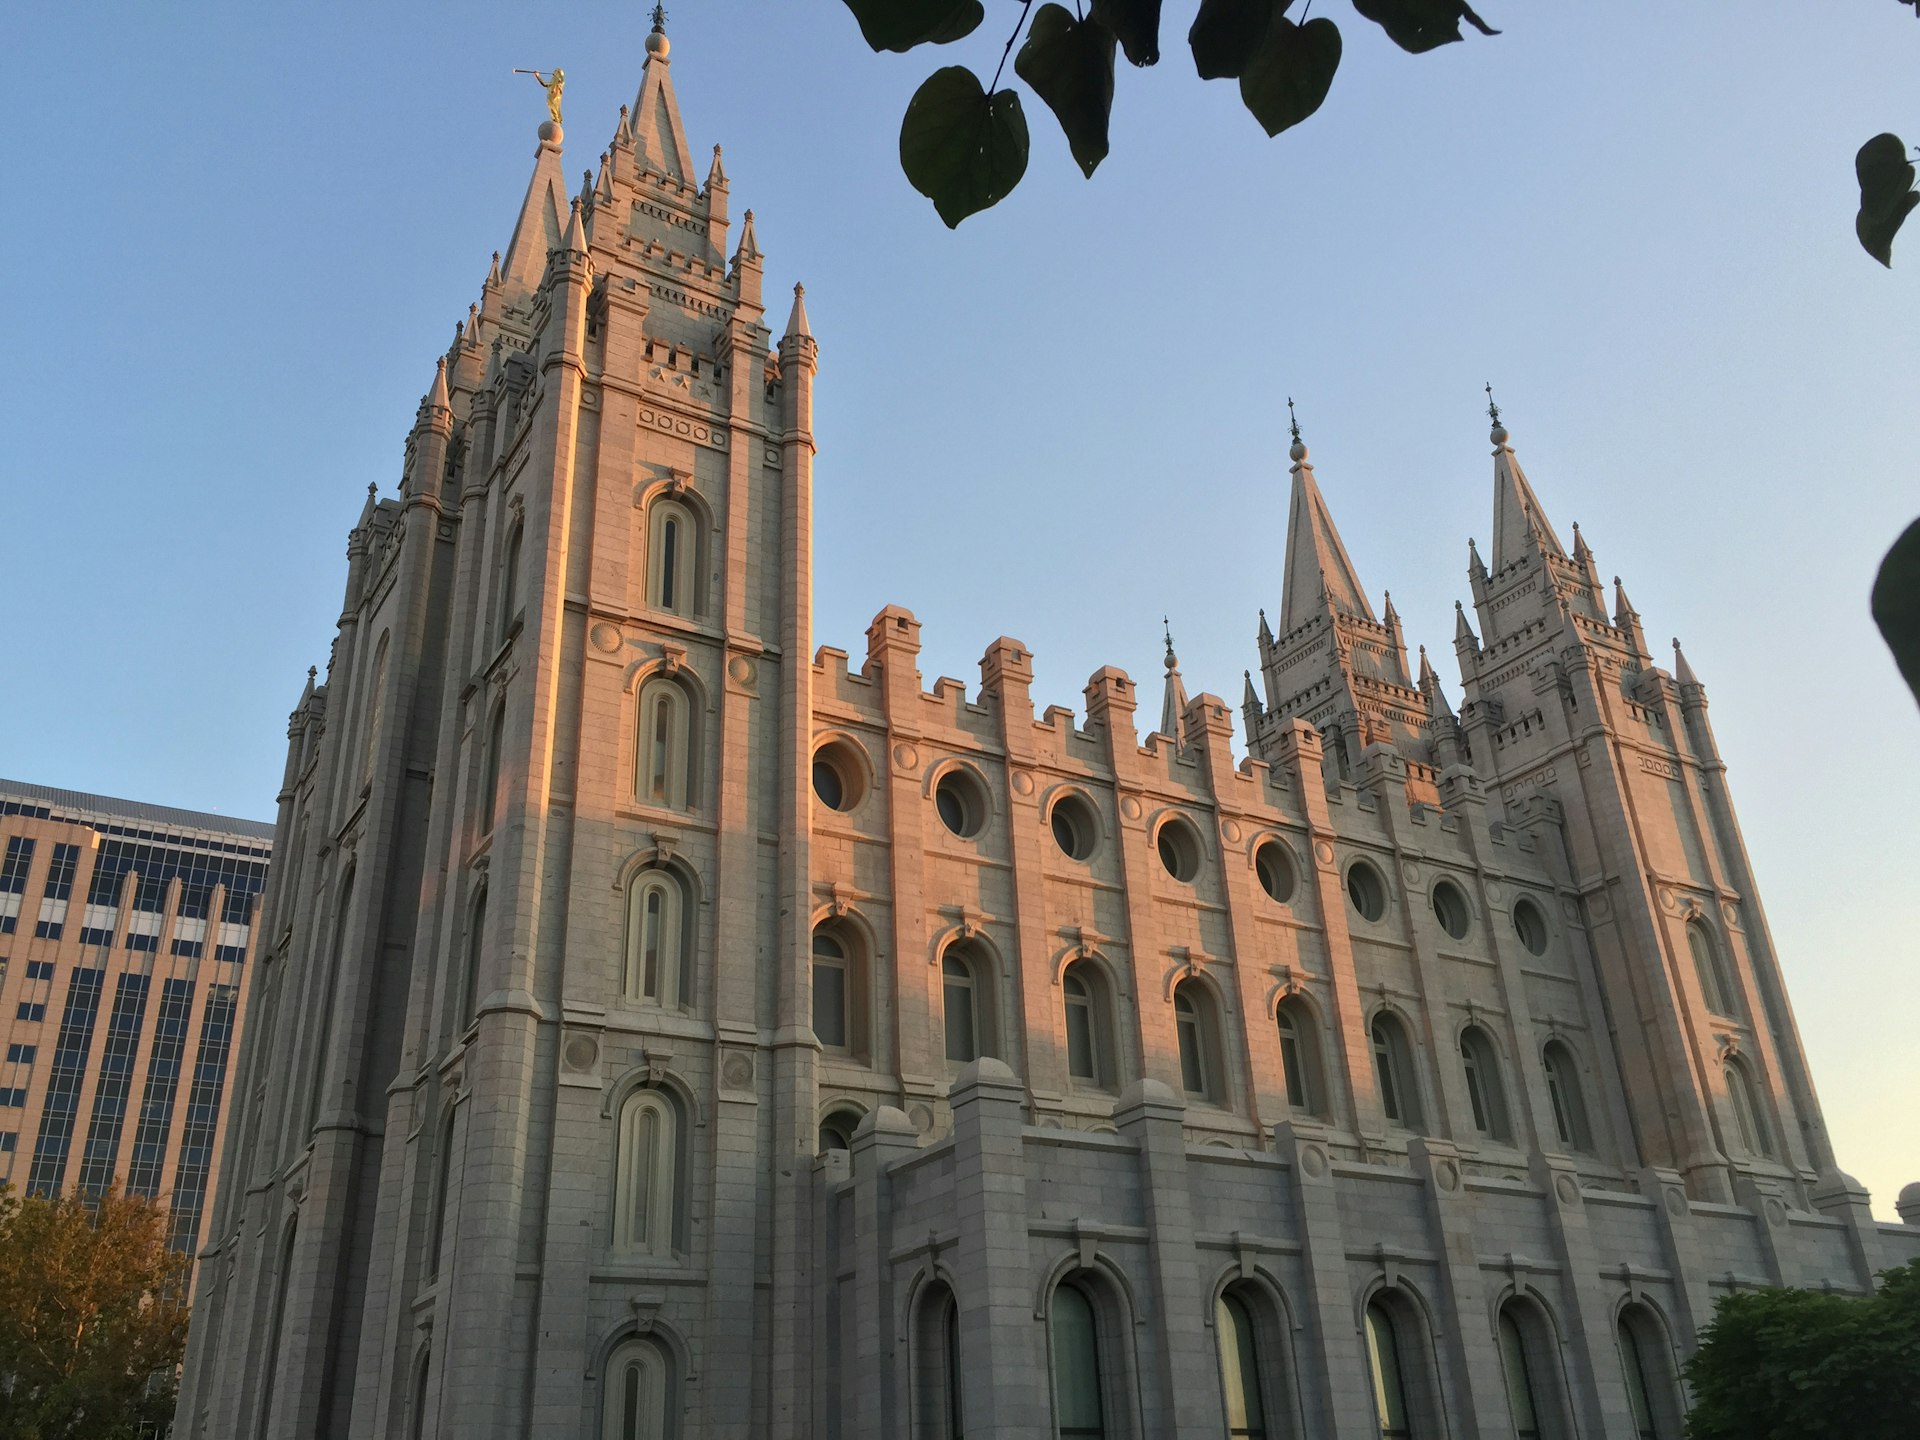 Dedicated in 1893, the Salt Lake Temple took 40 years to complete. Image by Kerry Christiani / Lonely Planet